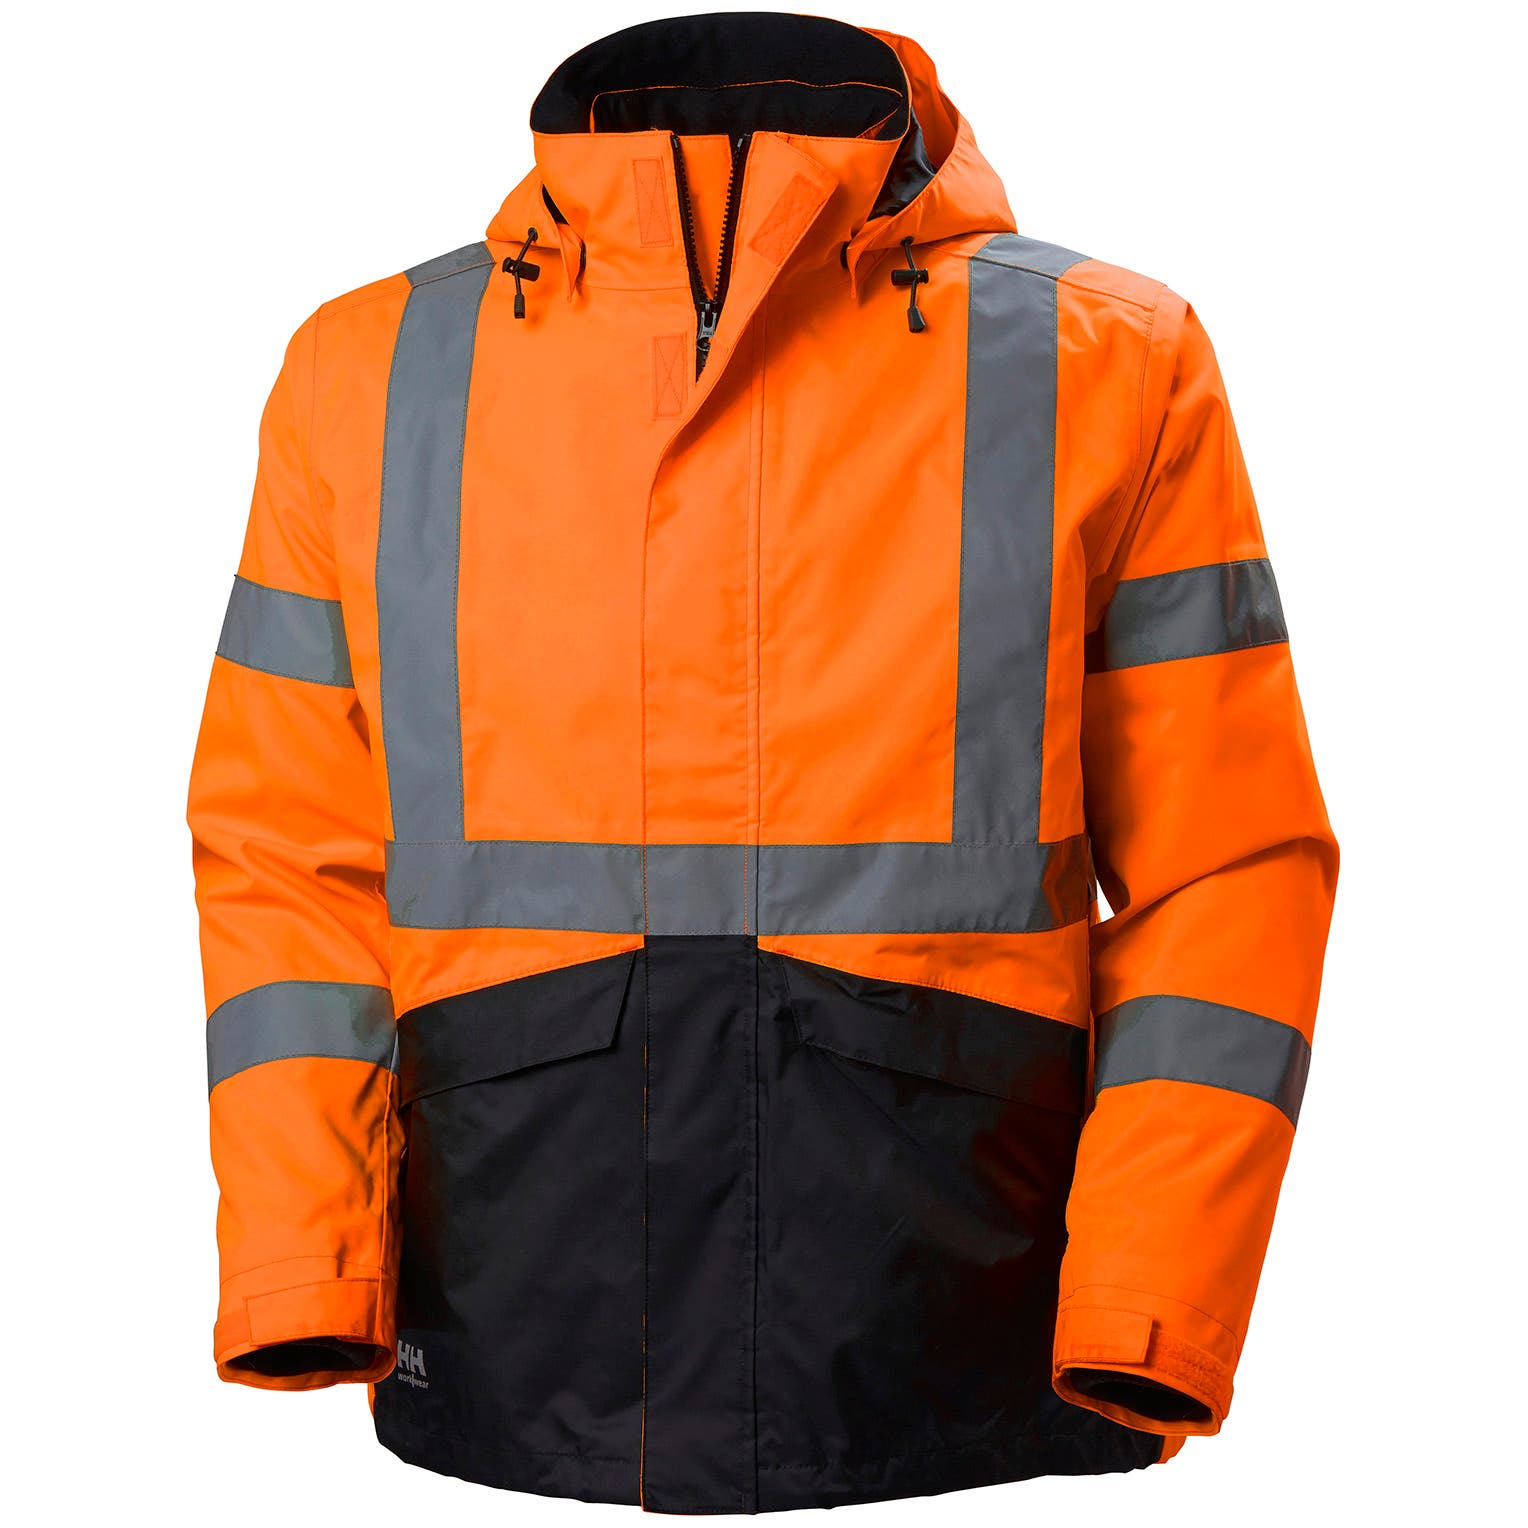 Helly Hansen Men's Alta Hi Vis Class 3 Shell Jacket in HV Orange/Charcoal from the front